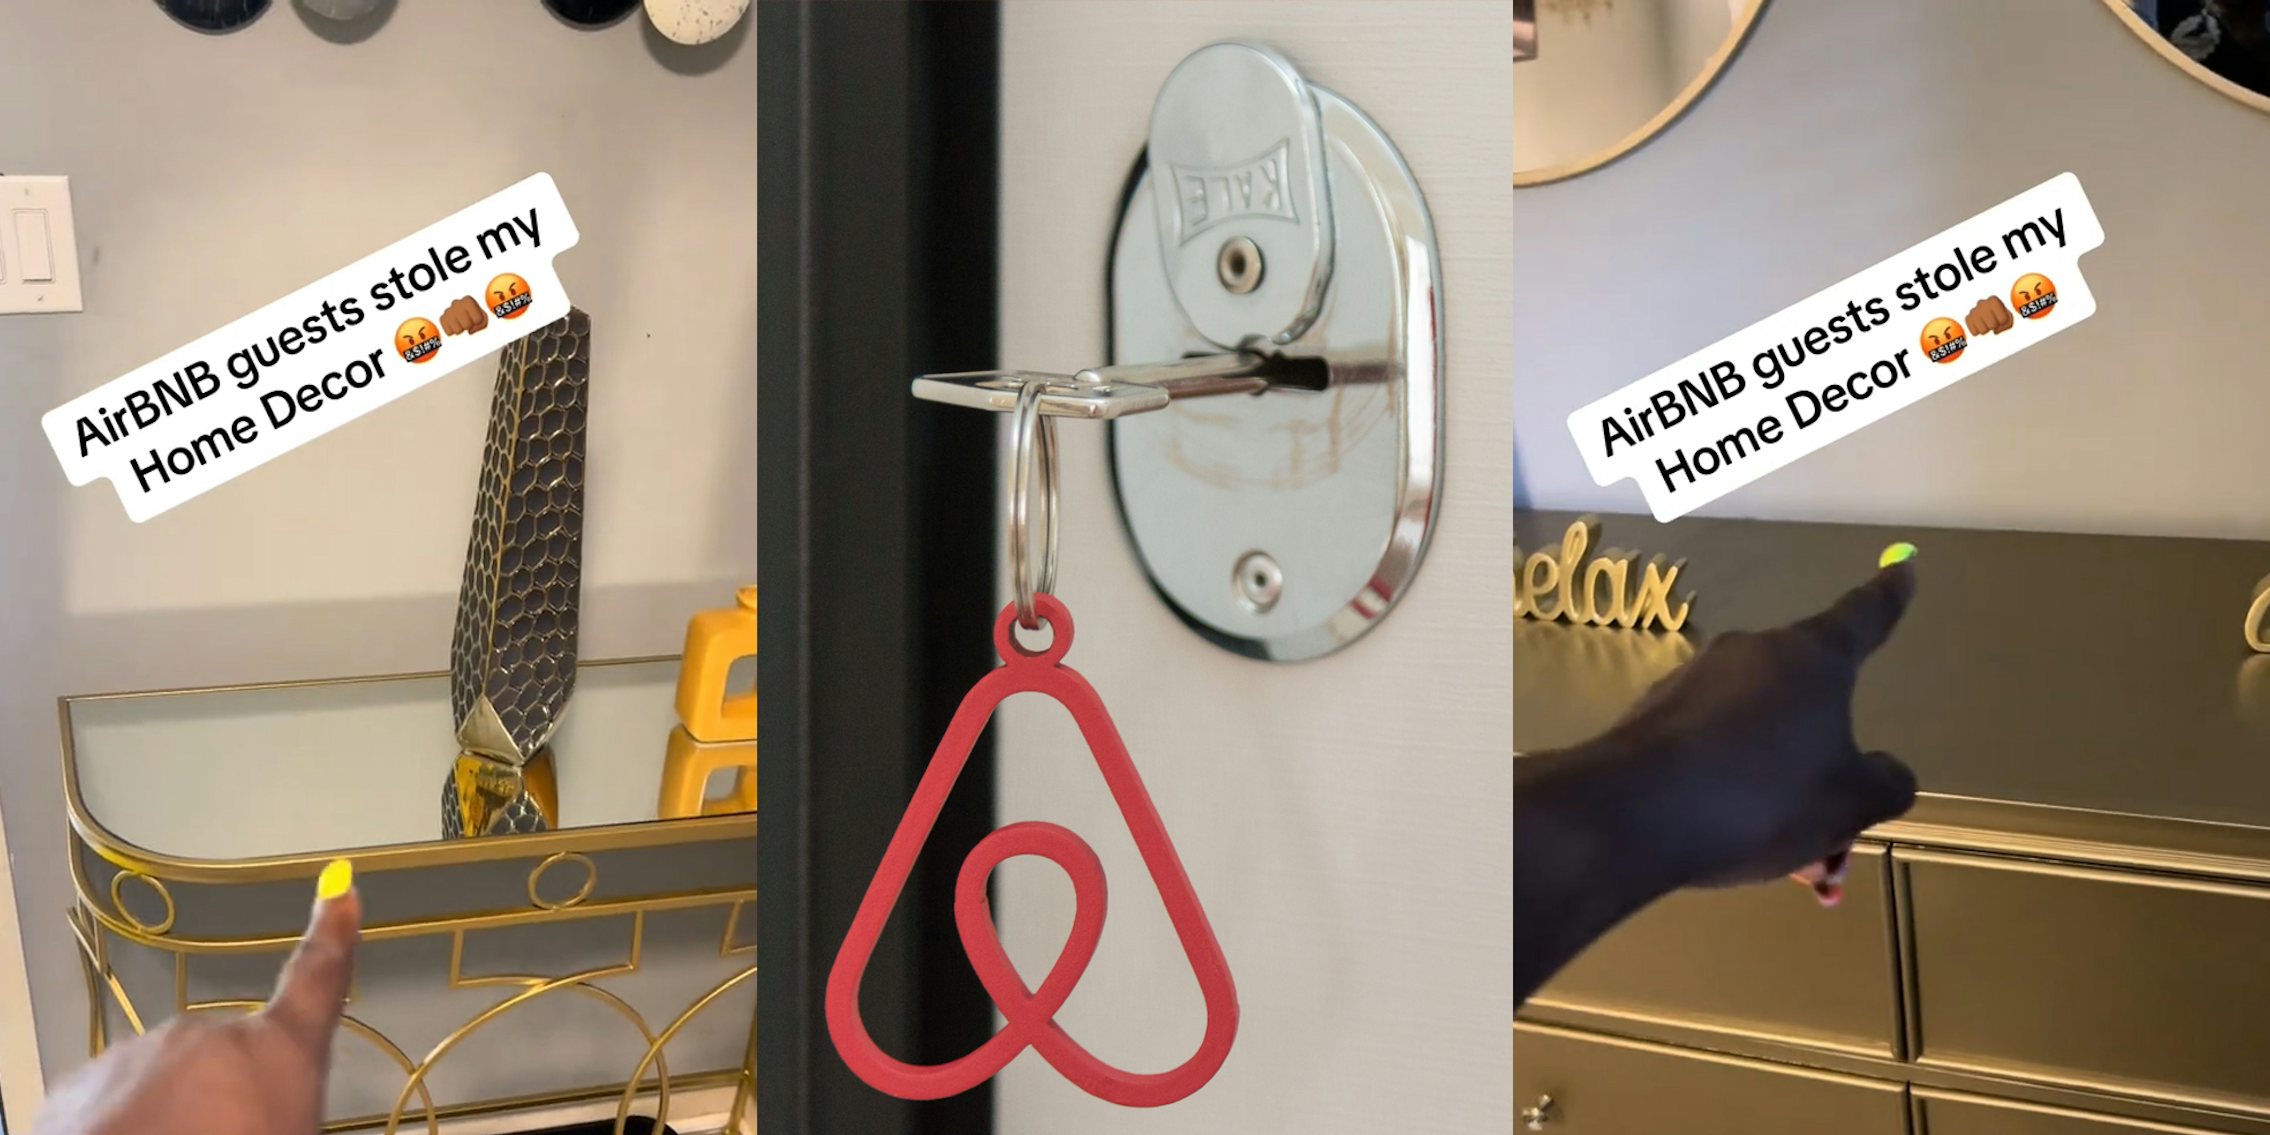 Airbnb host in home pointing to table area with missing decor spot with caption 'AirBNB guests stole my Home Decor' (l) Airbnb logo on keys un door lock (c) Airbnb host in home pointing to table area with missing decor spot with caption 'AirBNB guests stole my Home Decor' (r)